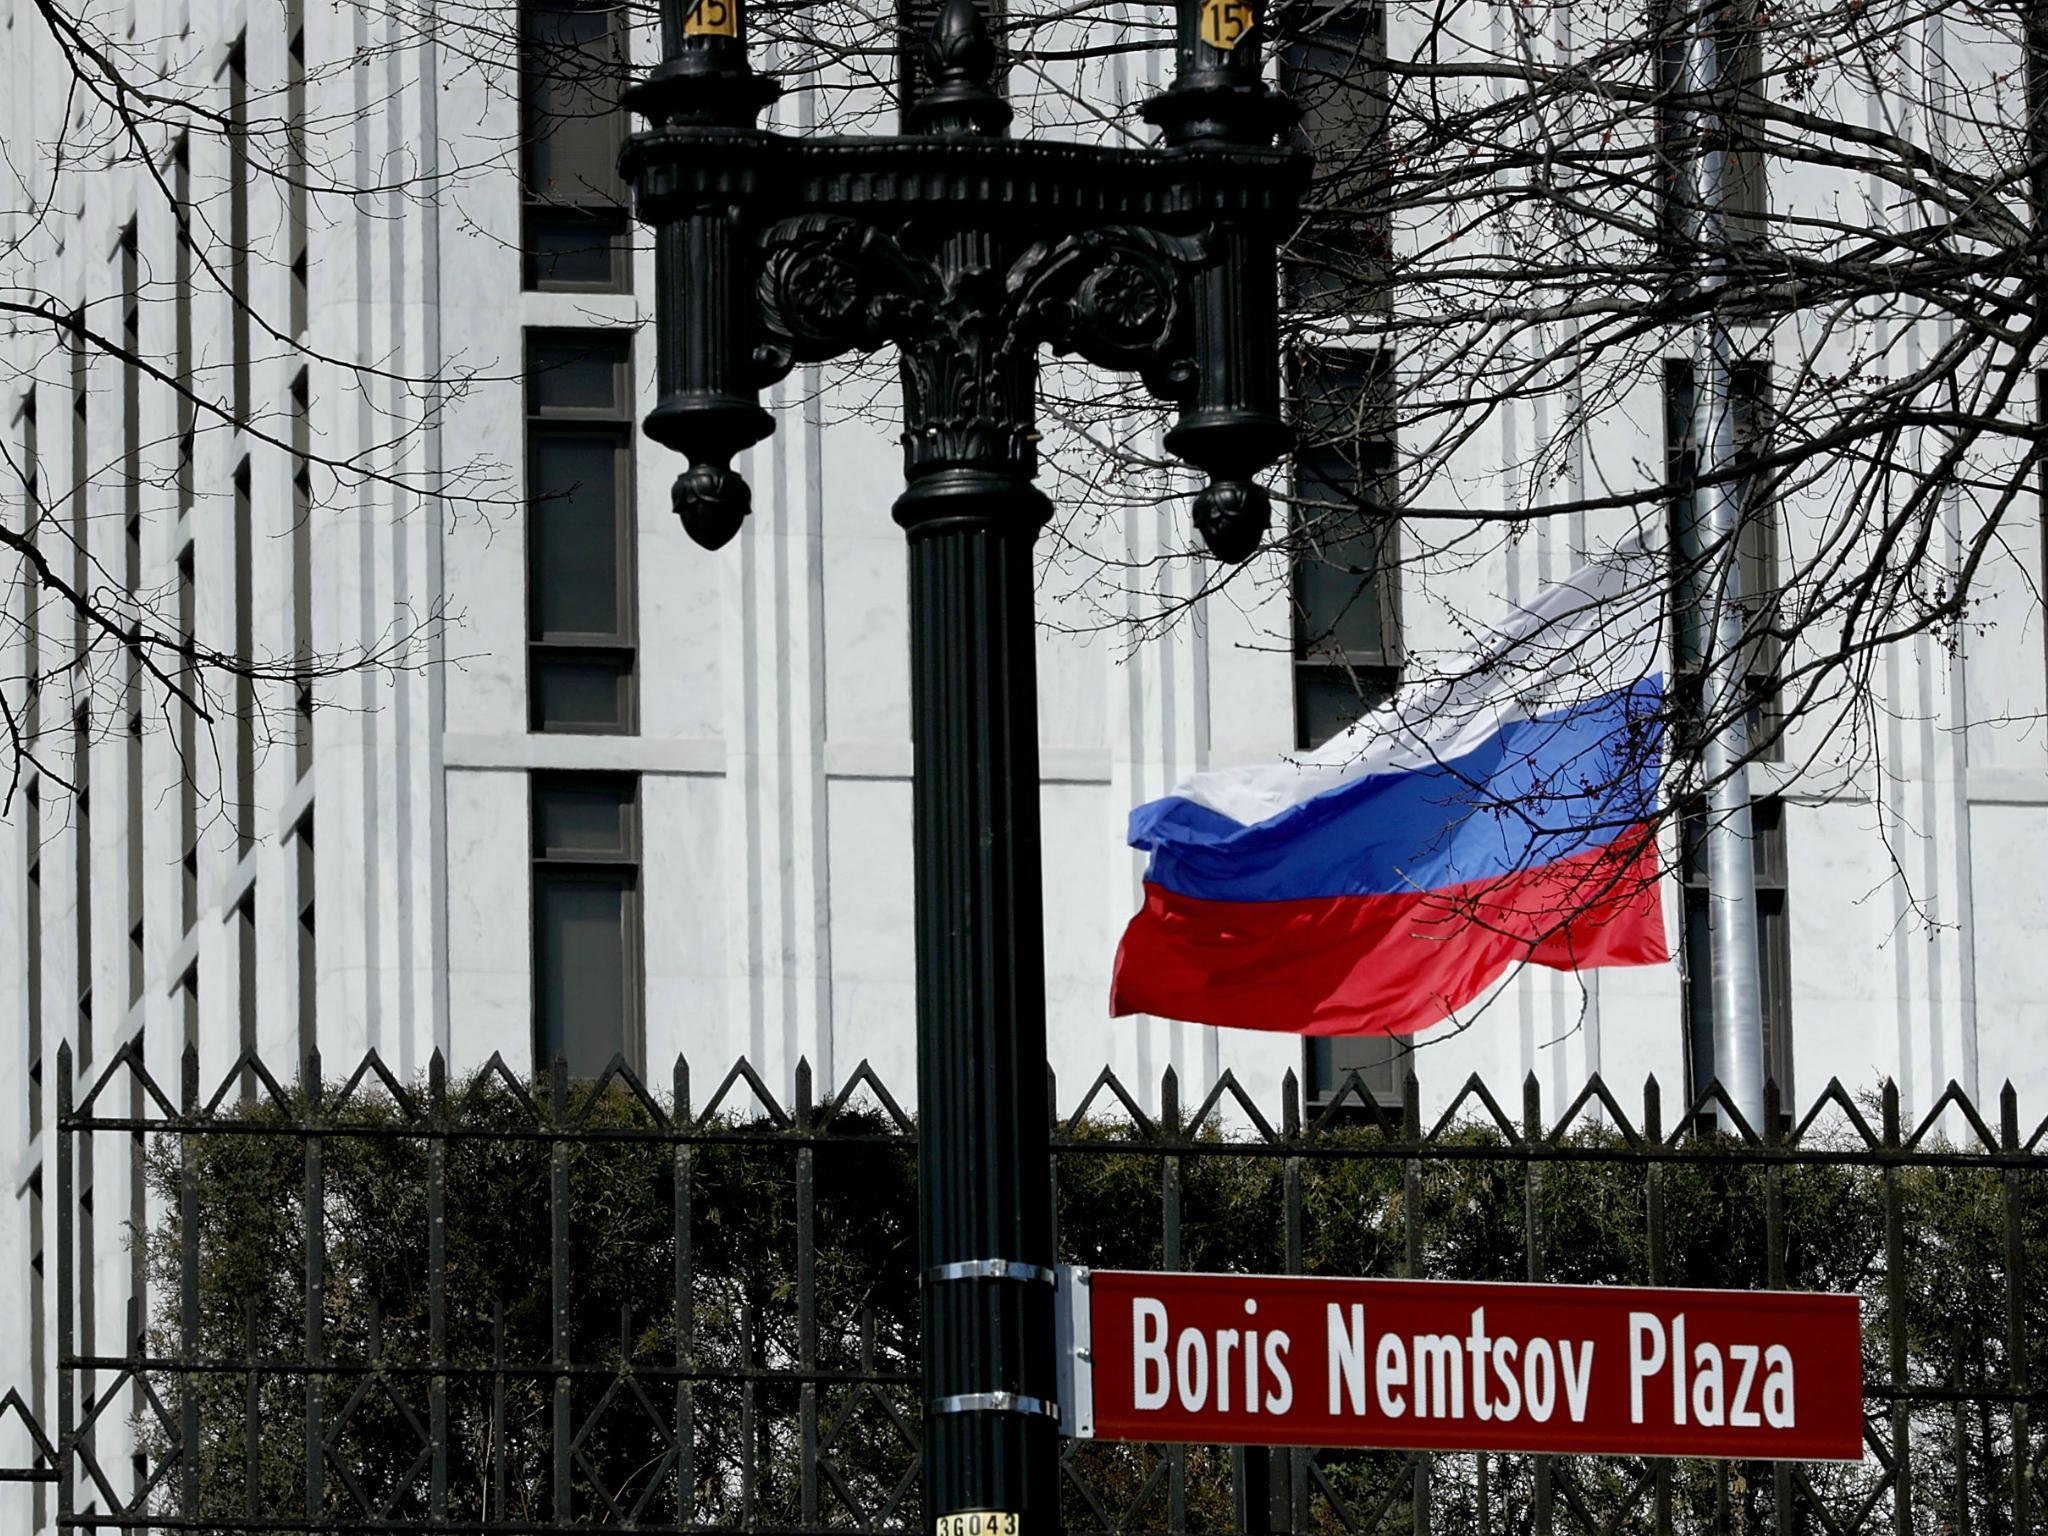 The Russian Federation flag flies in front of its embassy in Washington, DC.